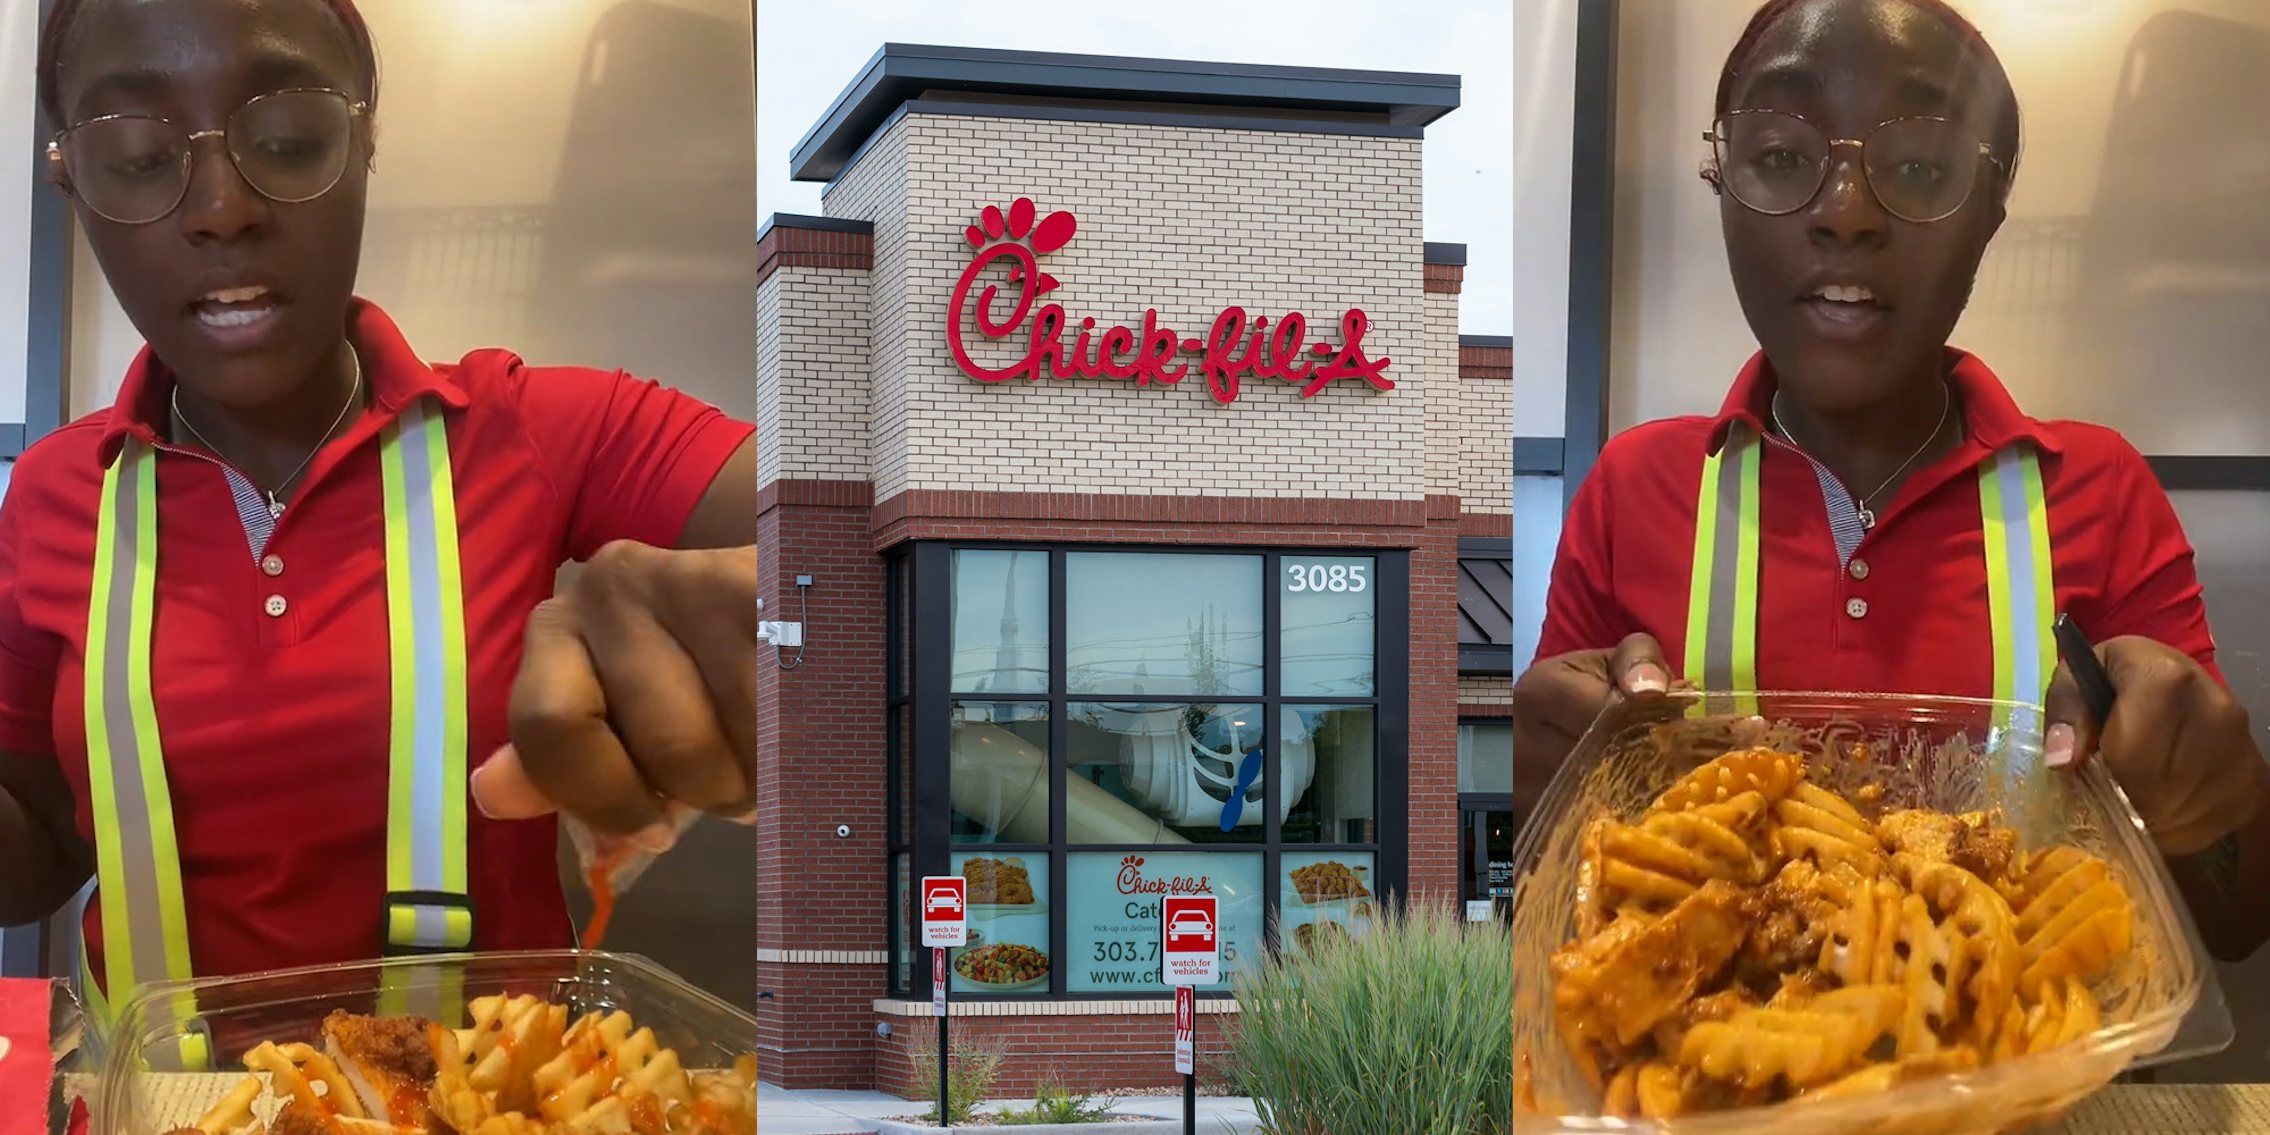 Chick-Fil-A worker putting sauce on chicken and fries in clear container (l) Chick-Fil-A sign on building (c) Chick-Fil-A worker holding chicken and fries with sauce in clear container (r)